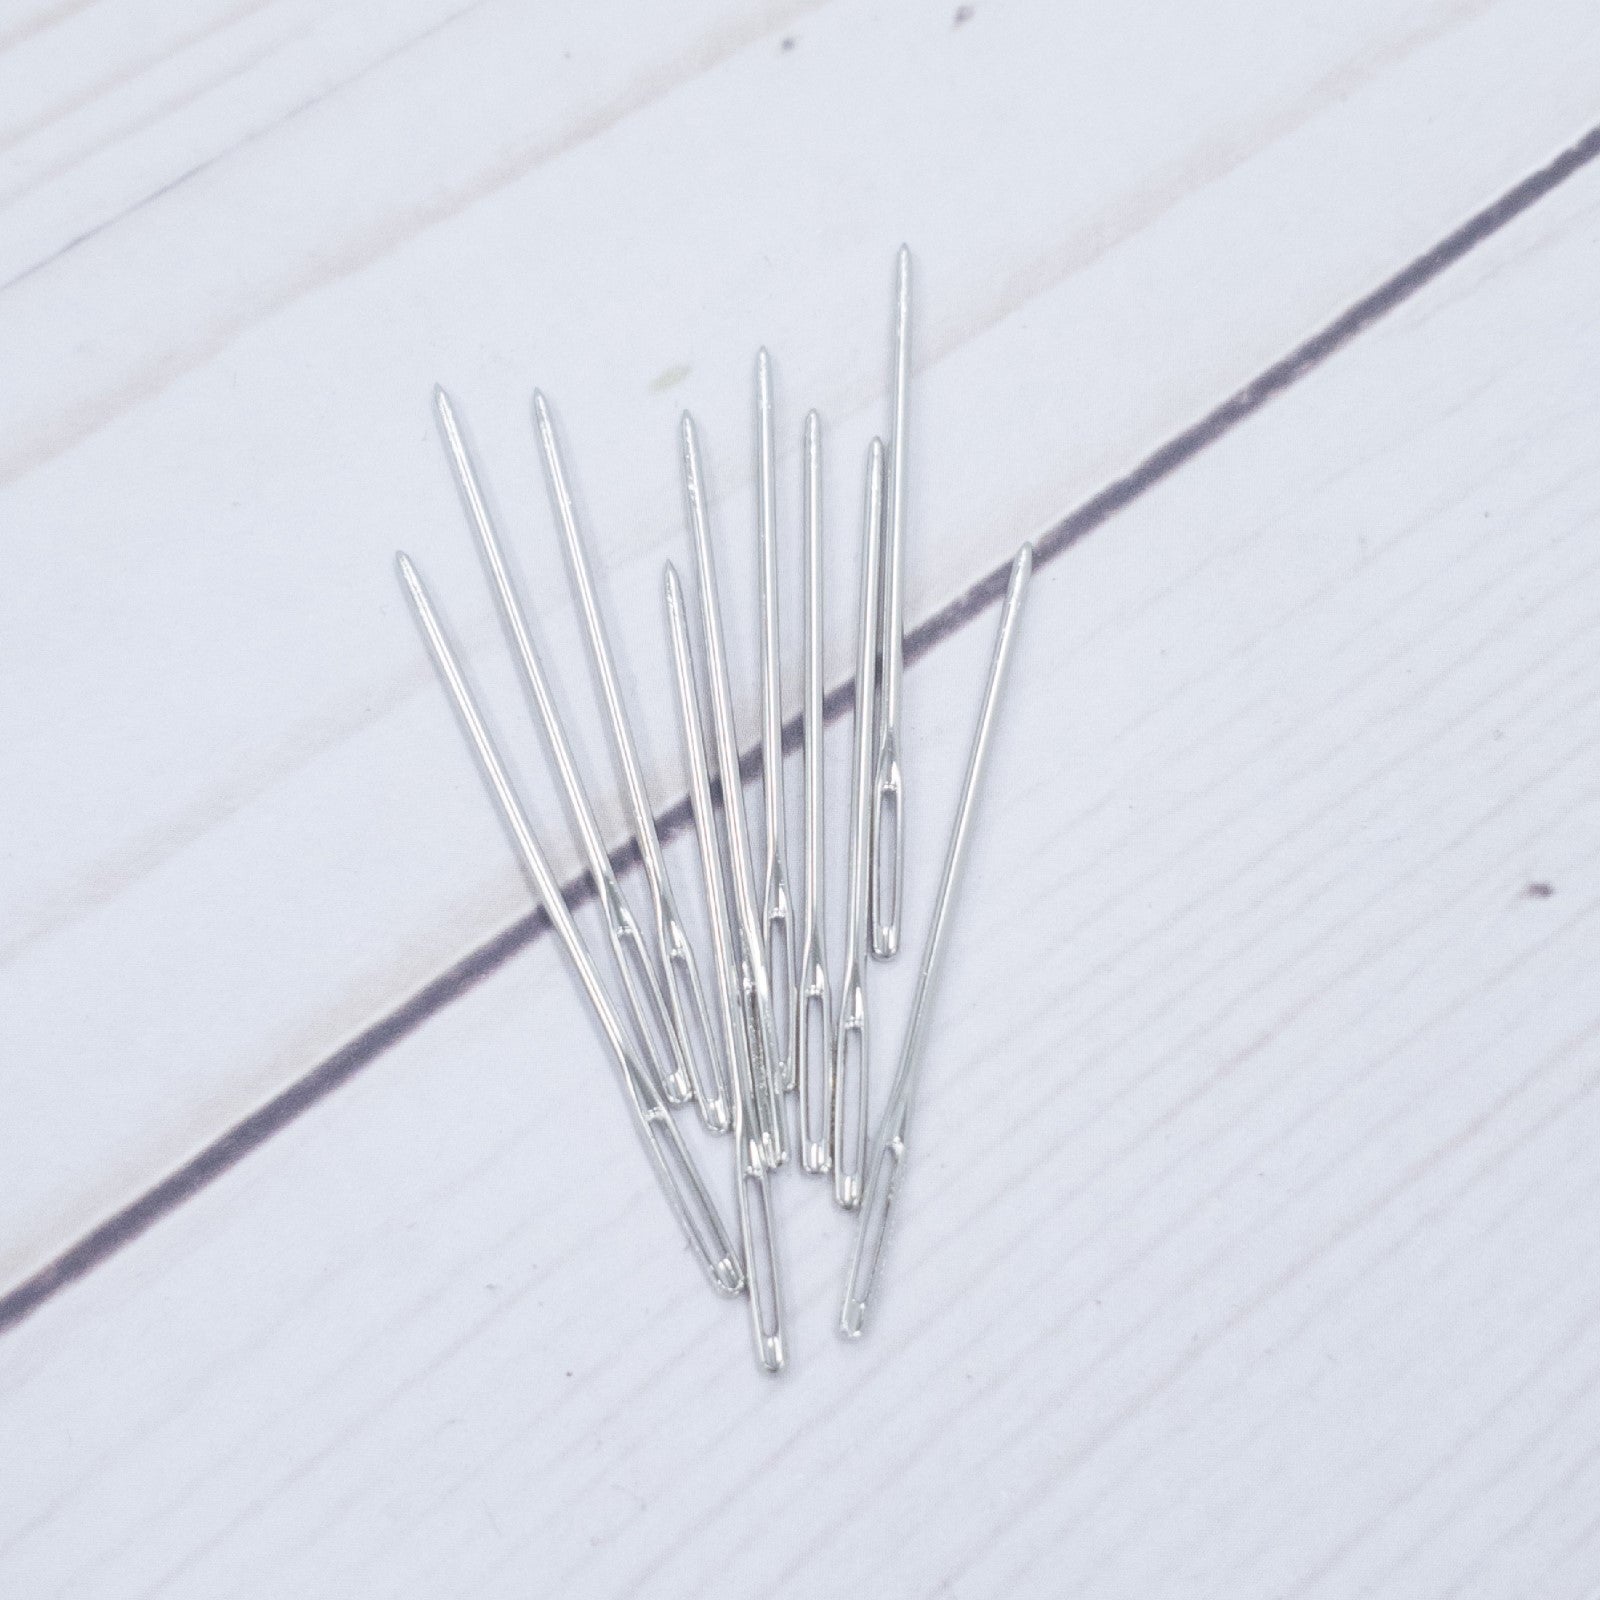 10 pk Blunt Tapestry Needles - Size 18